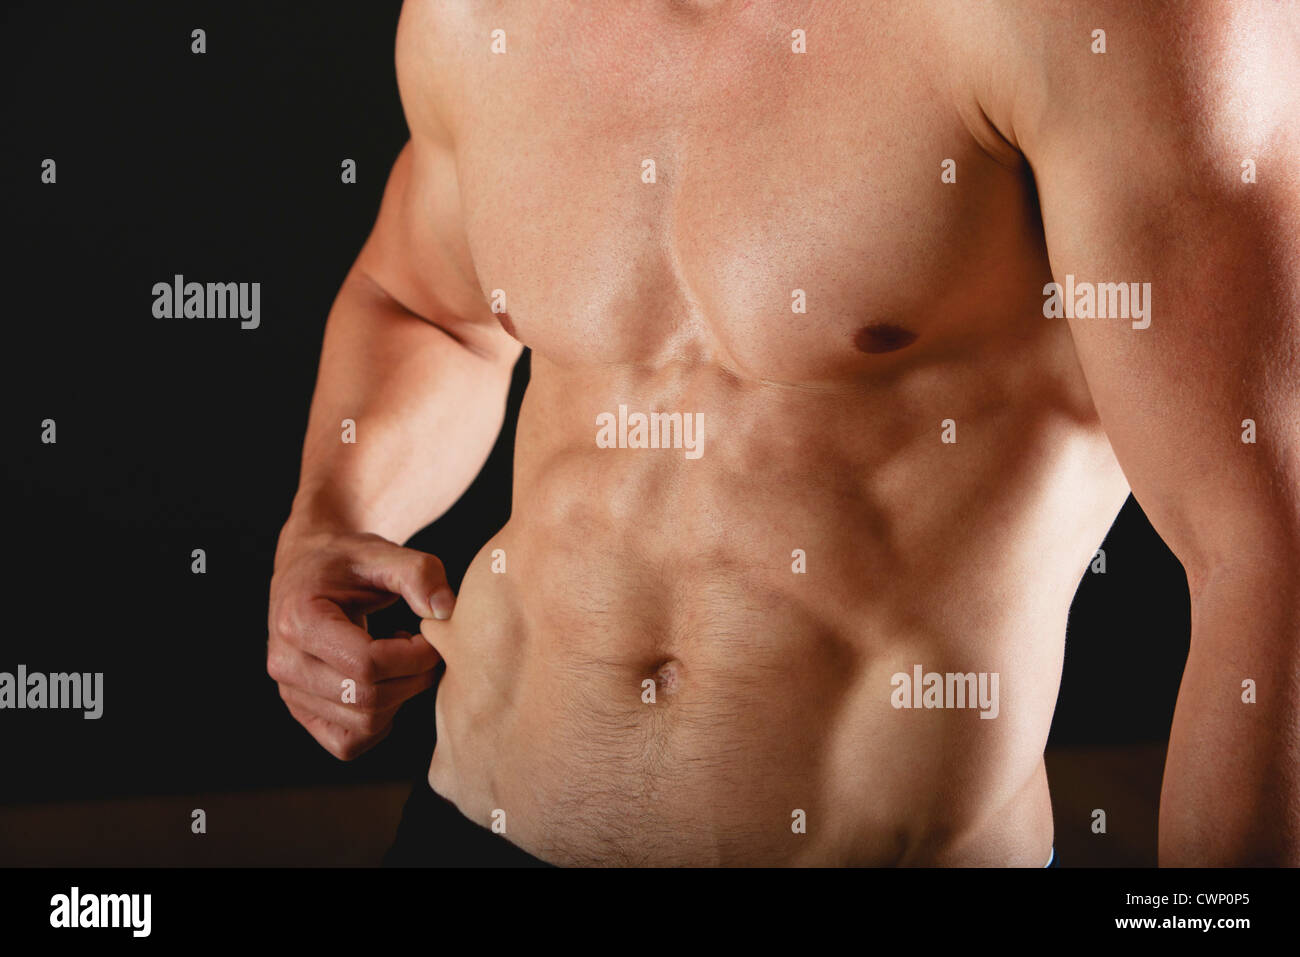 Barechested muscular man pinching waist, mid section Stock Photo